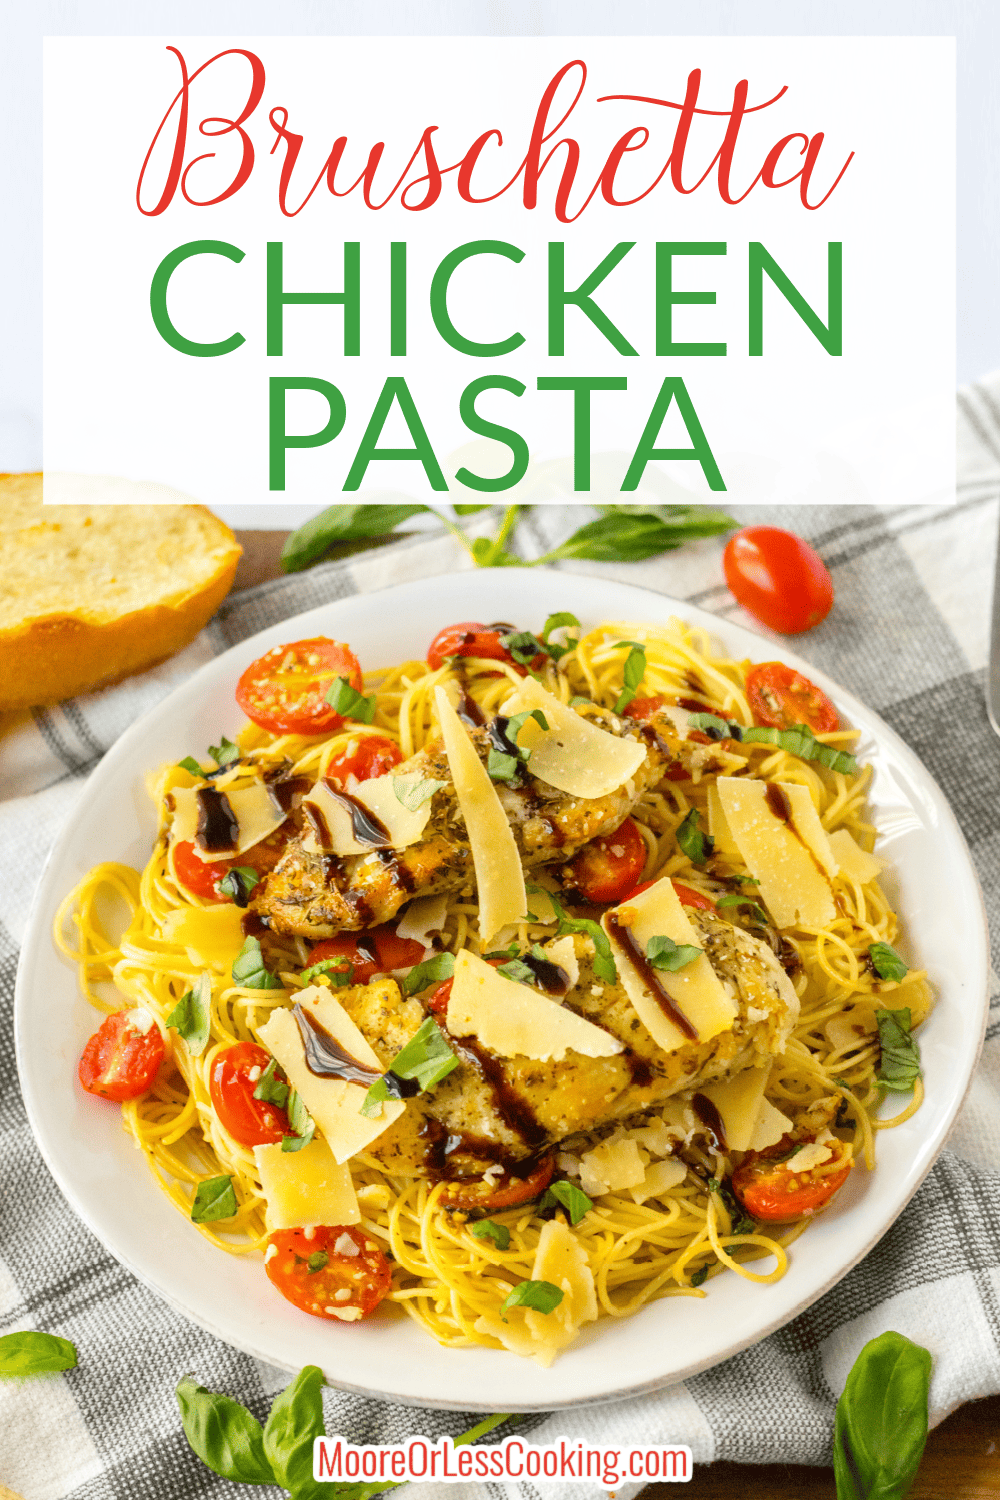 With minimal time and ingredients, you can have this Italian-inspired Bruschetta Chicken Pasta meal on the table in under 30 minutes! This easy-to-make chicken dinner will become your new favorite way to turn the flavors of a classic Italian appetizer into a crowd-pleasing meal. via @Mooreorlesscook